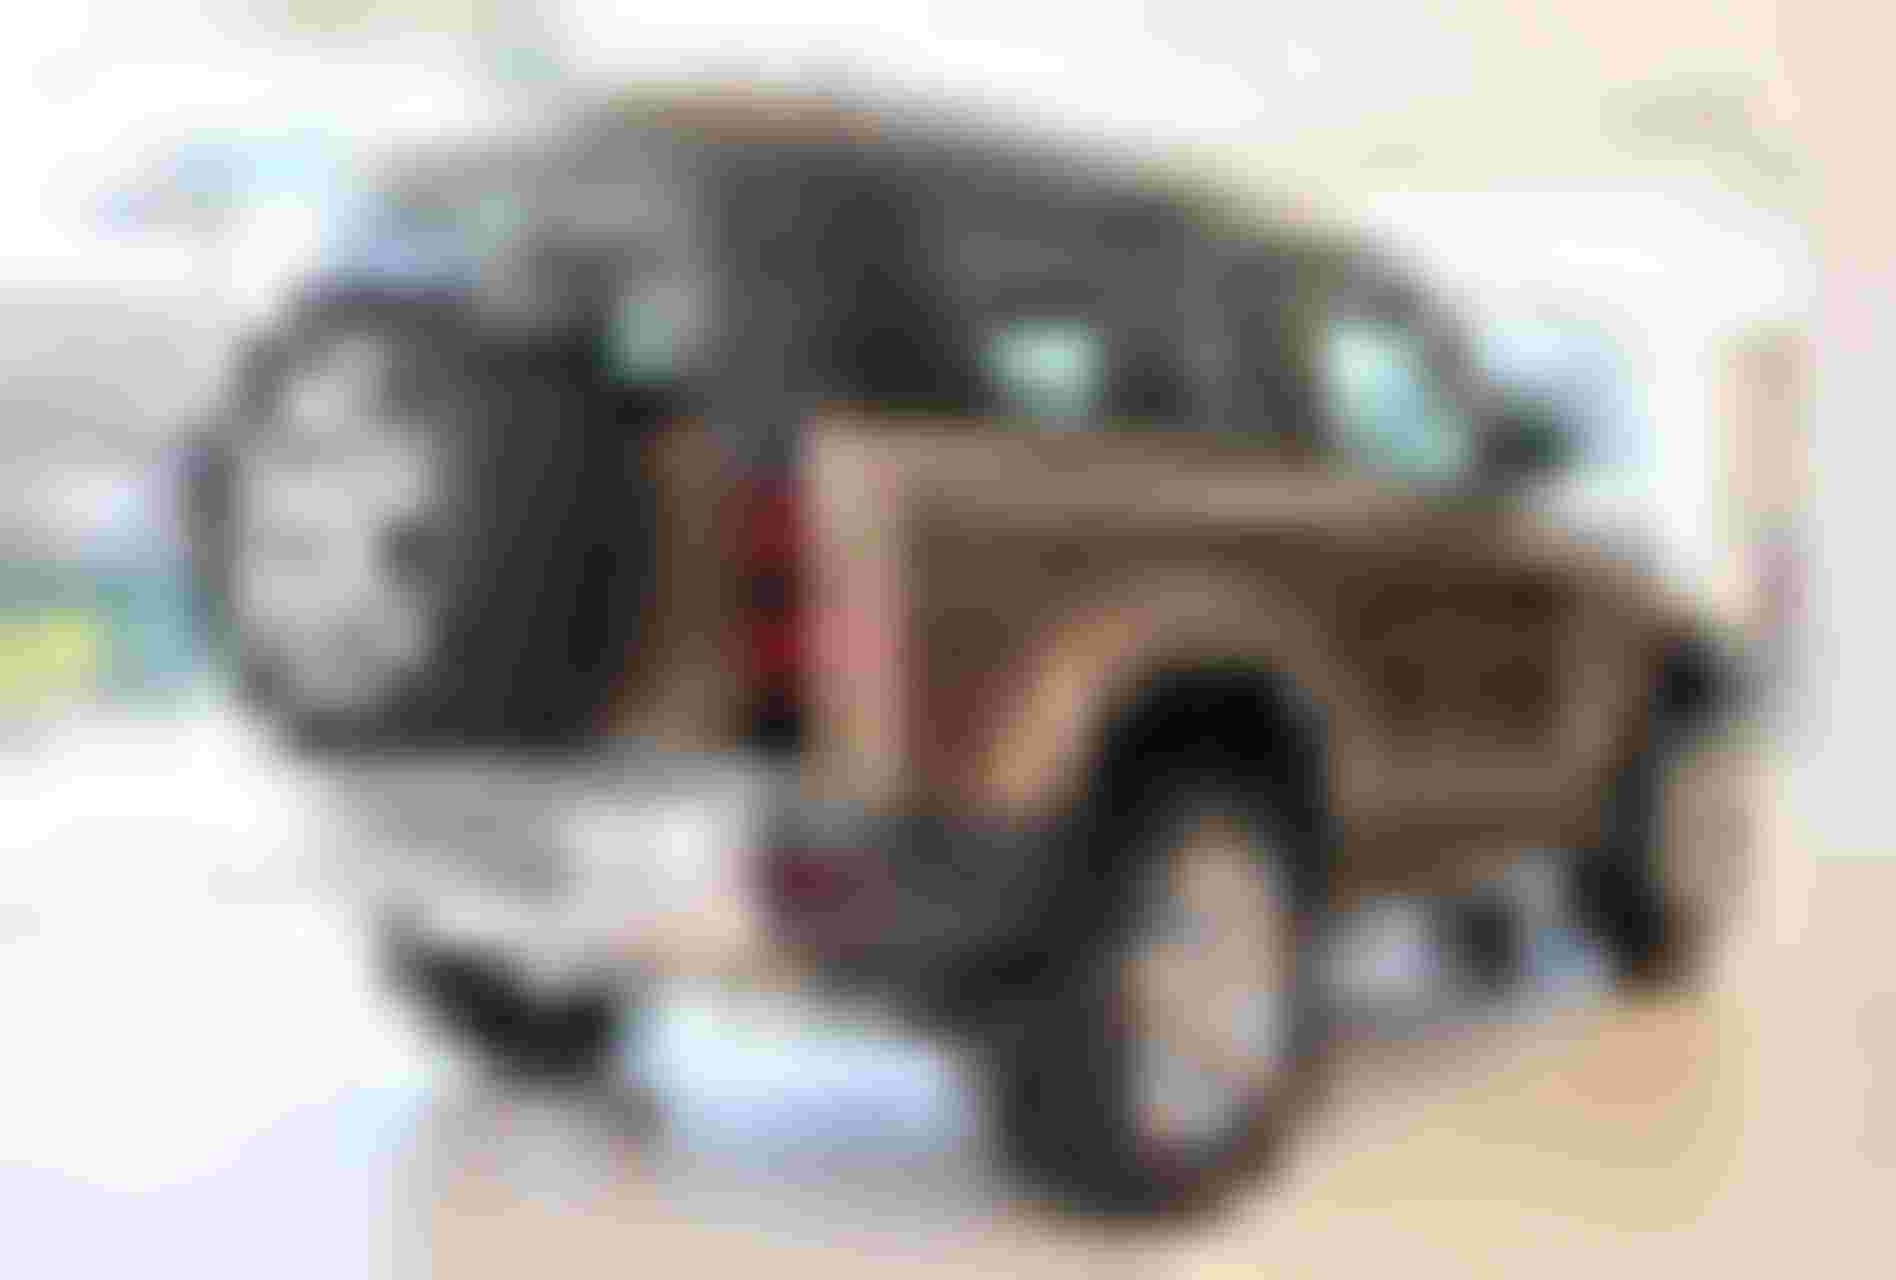 suv off-road 4 ty dong, chon land rover defender hay jeep wrangler?